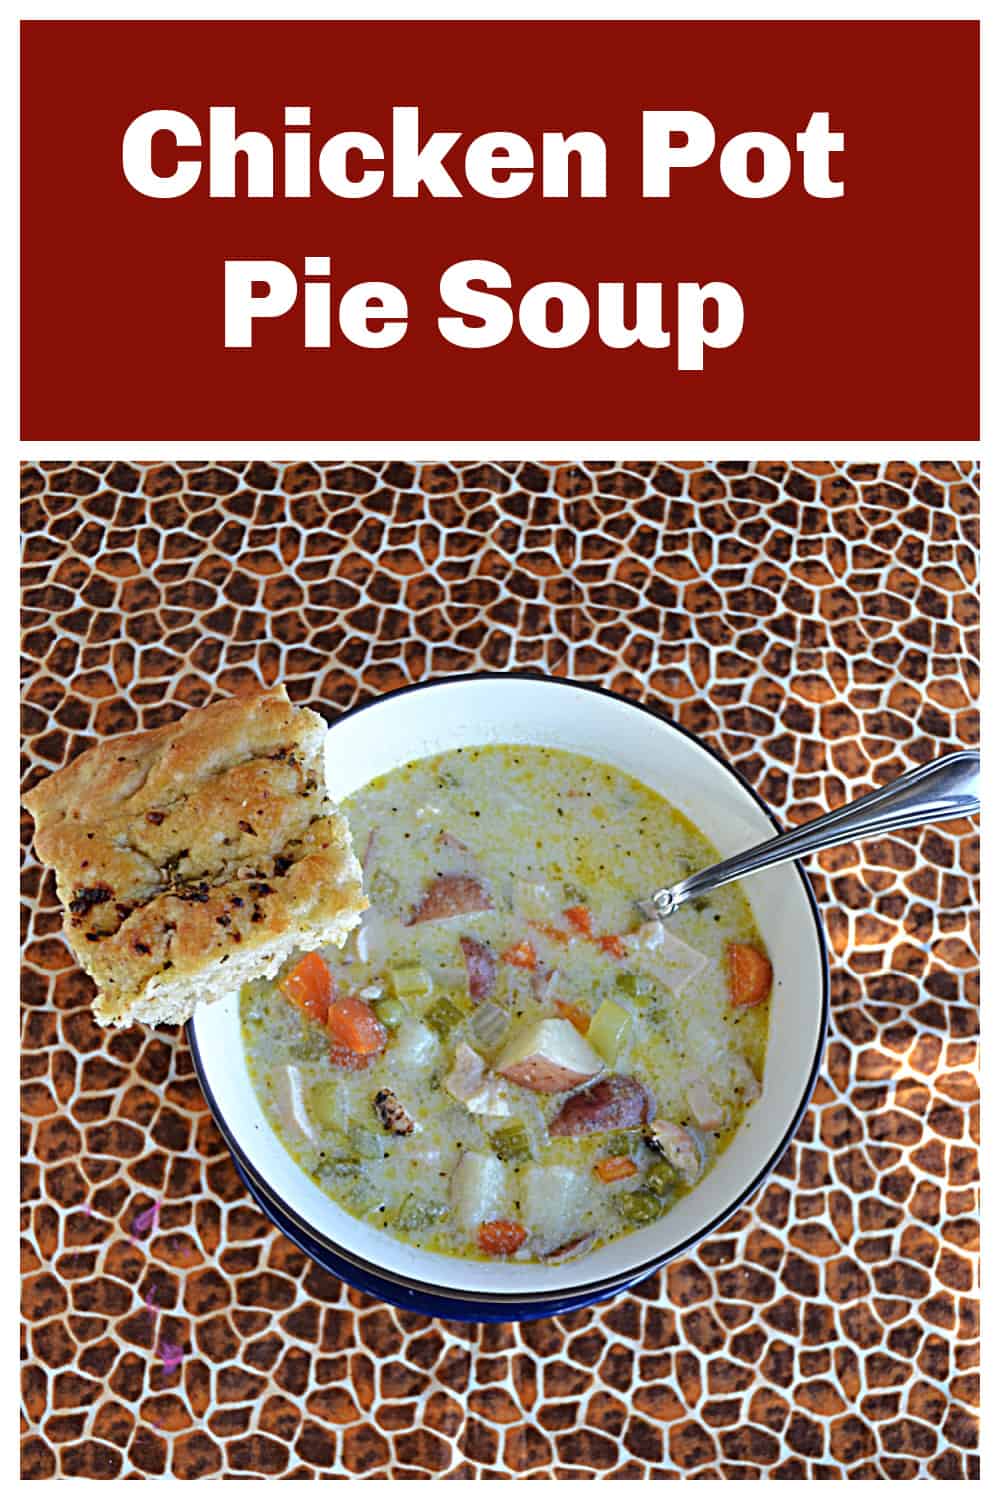 Pin Image:   Text title, a bowl of soup with a piece of bread on the side. 